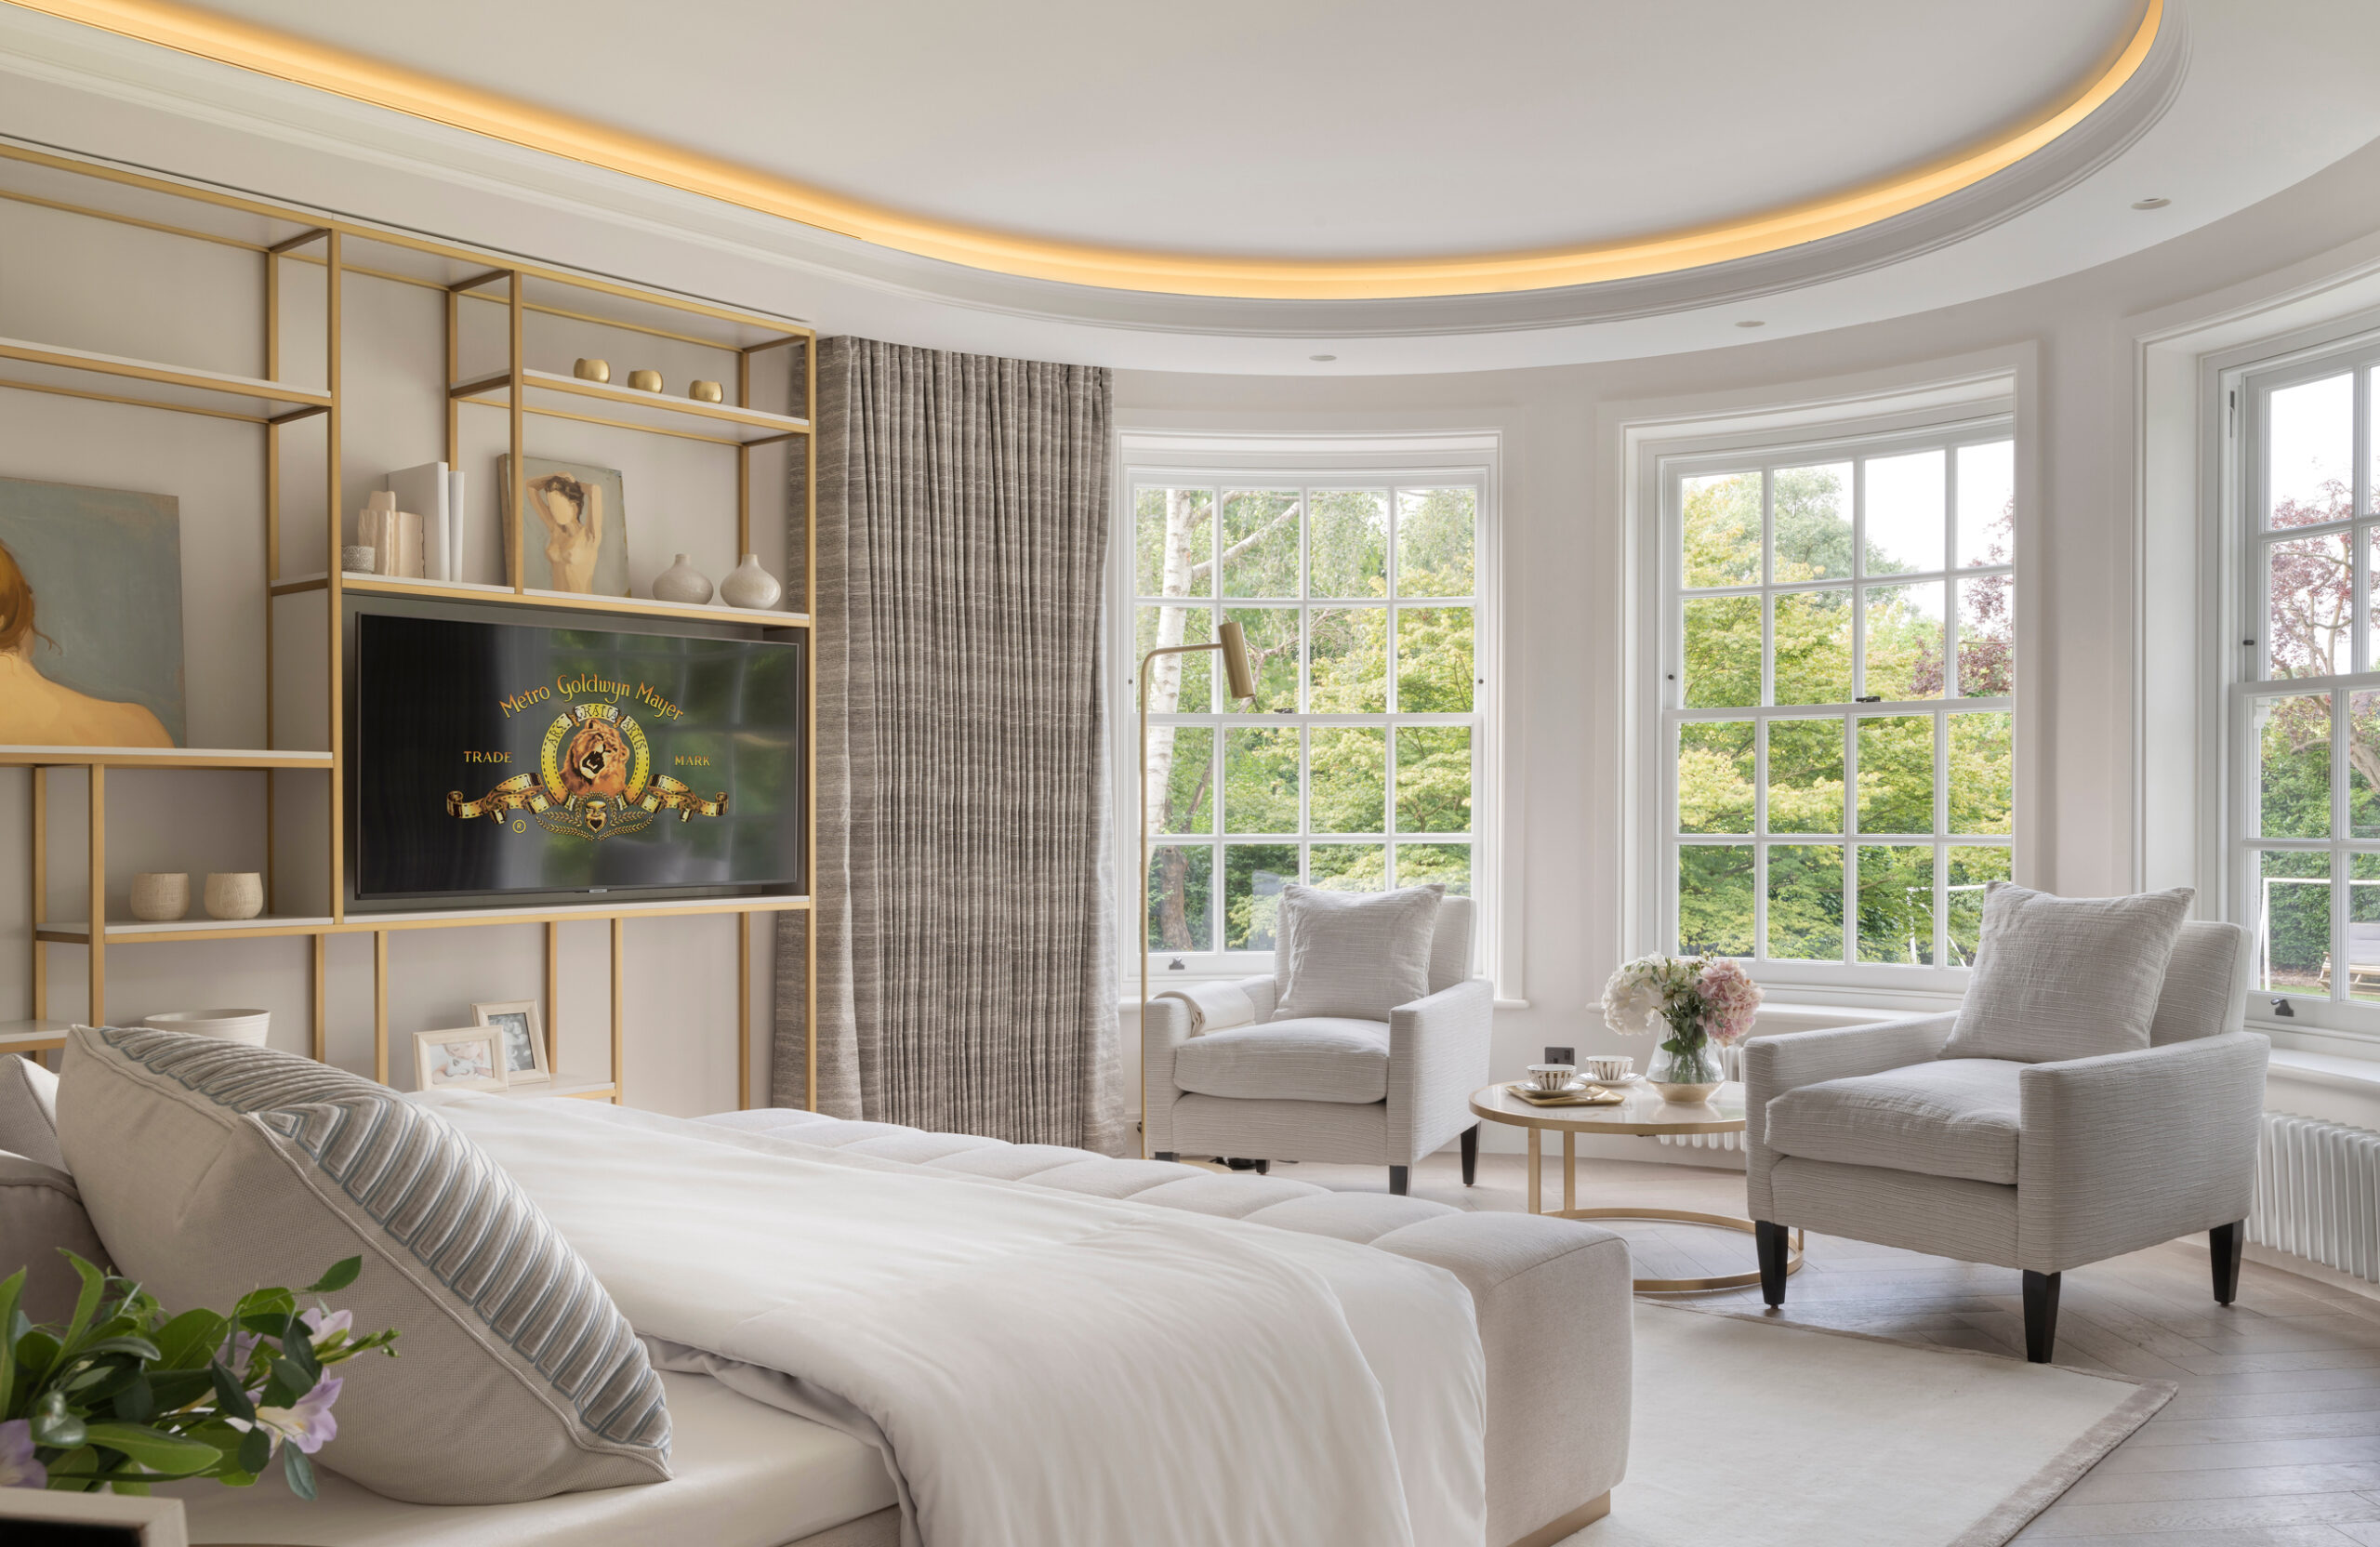 Master bedroom suite with curved sash window and illuminated coved ceiling